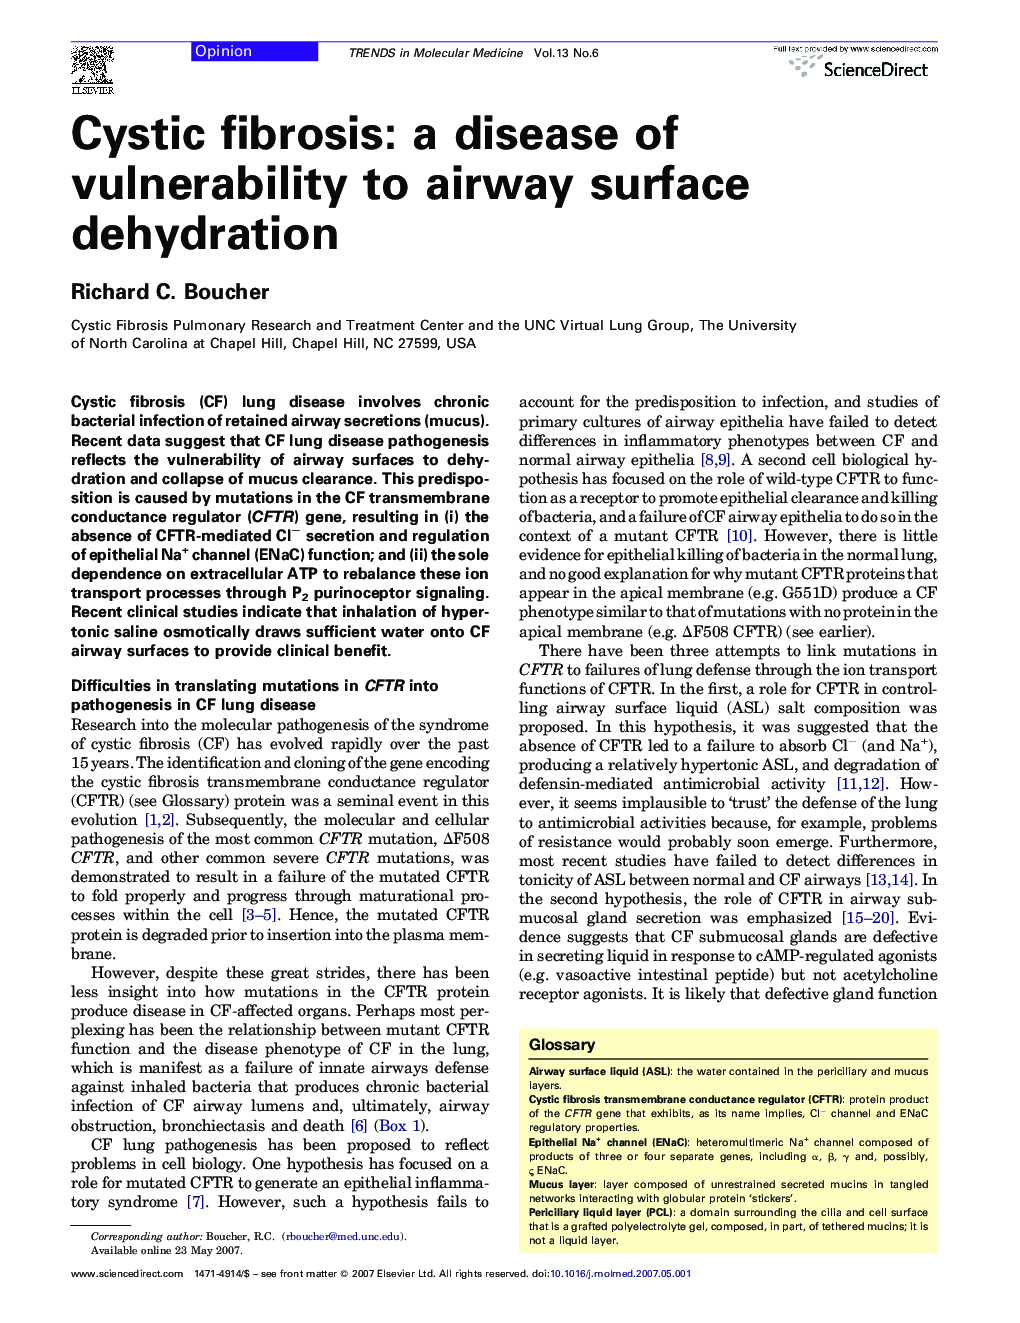 Cystic fibrosis: a disease of vulnerability to airway surface dehydration